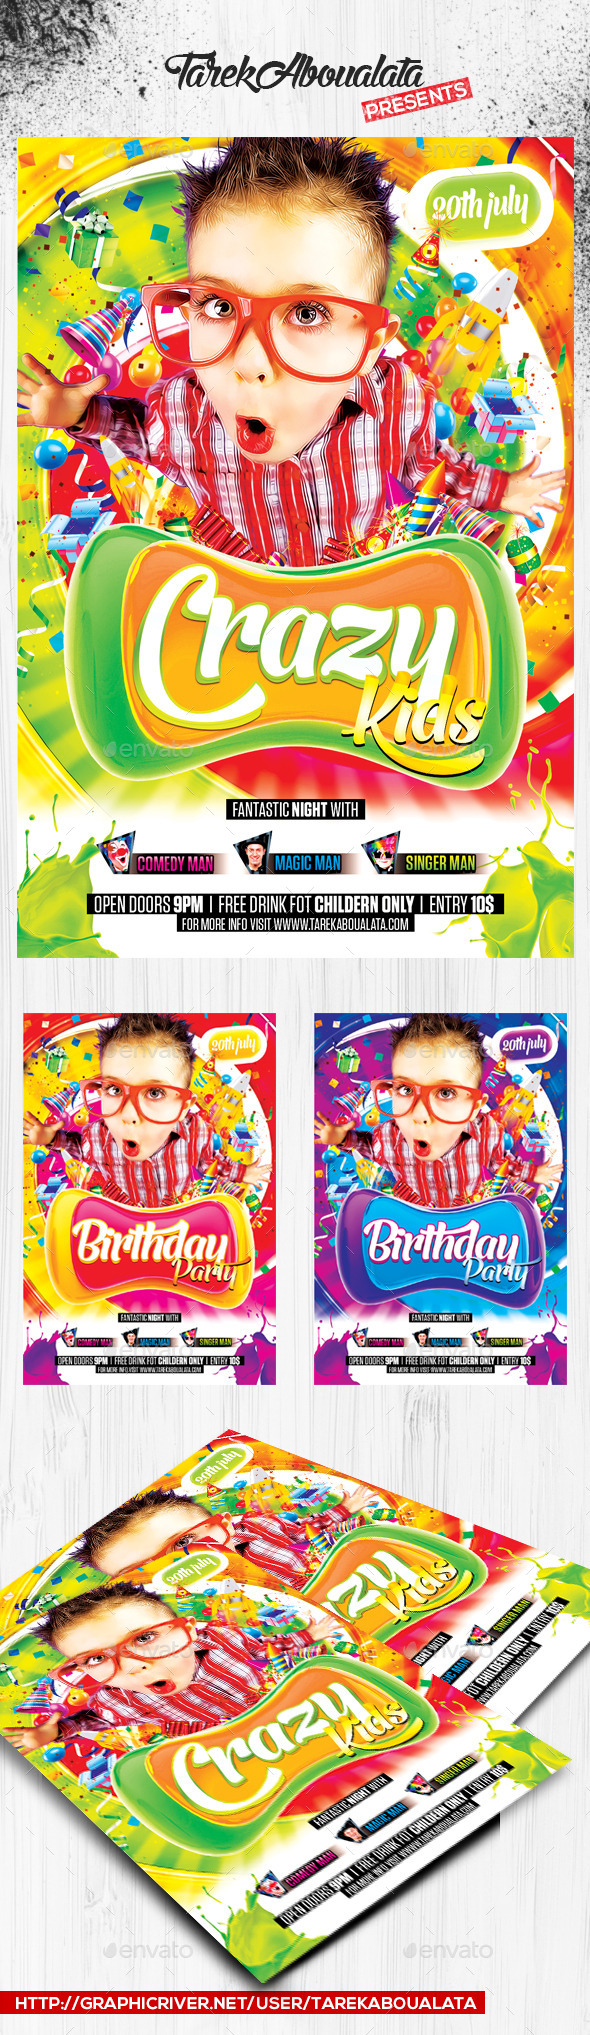 GraphicRiver Crazy Kids Party Flyer Template 11915030